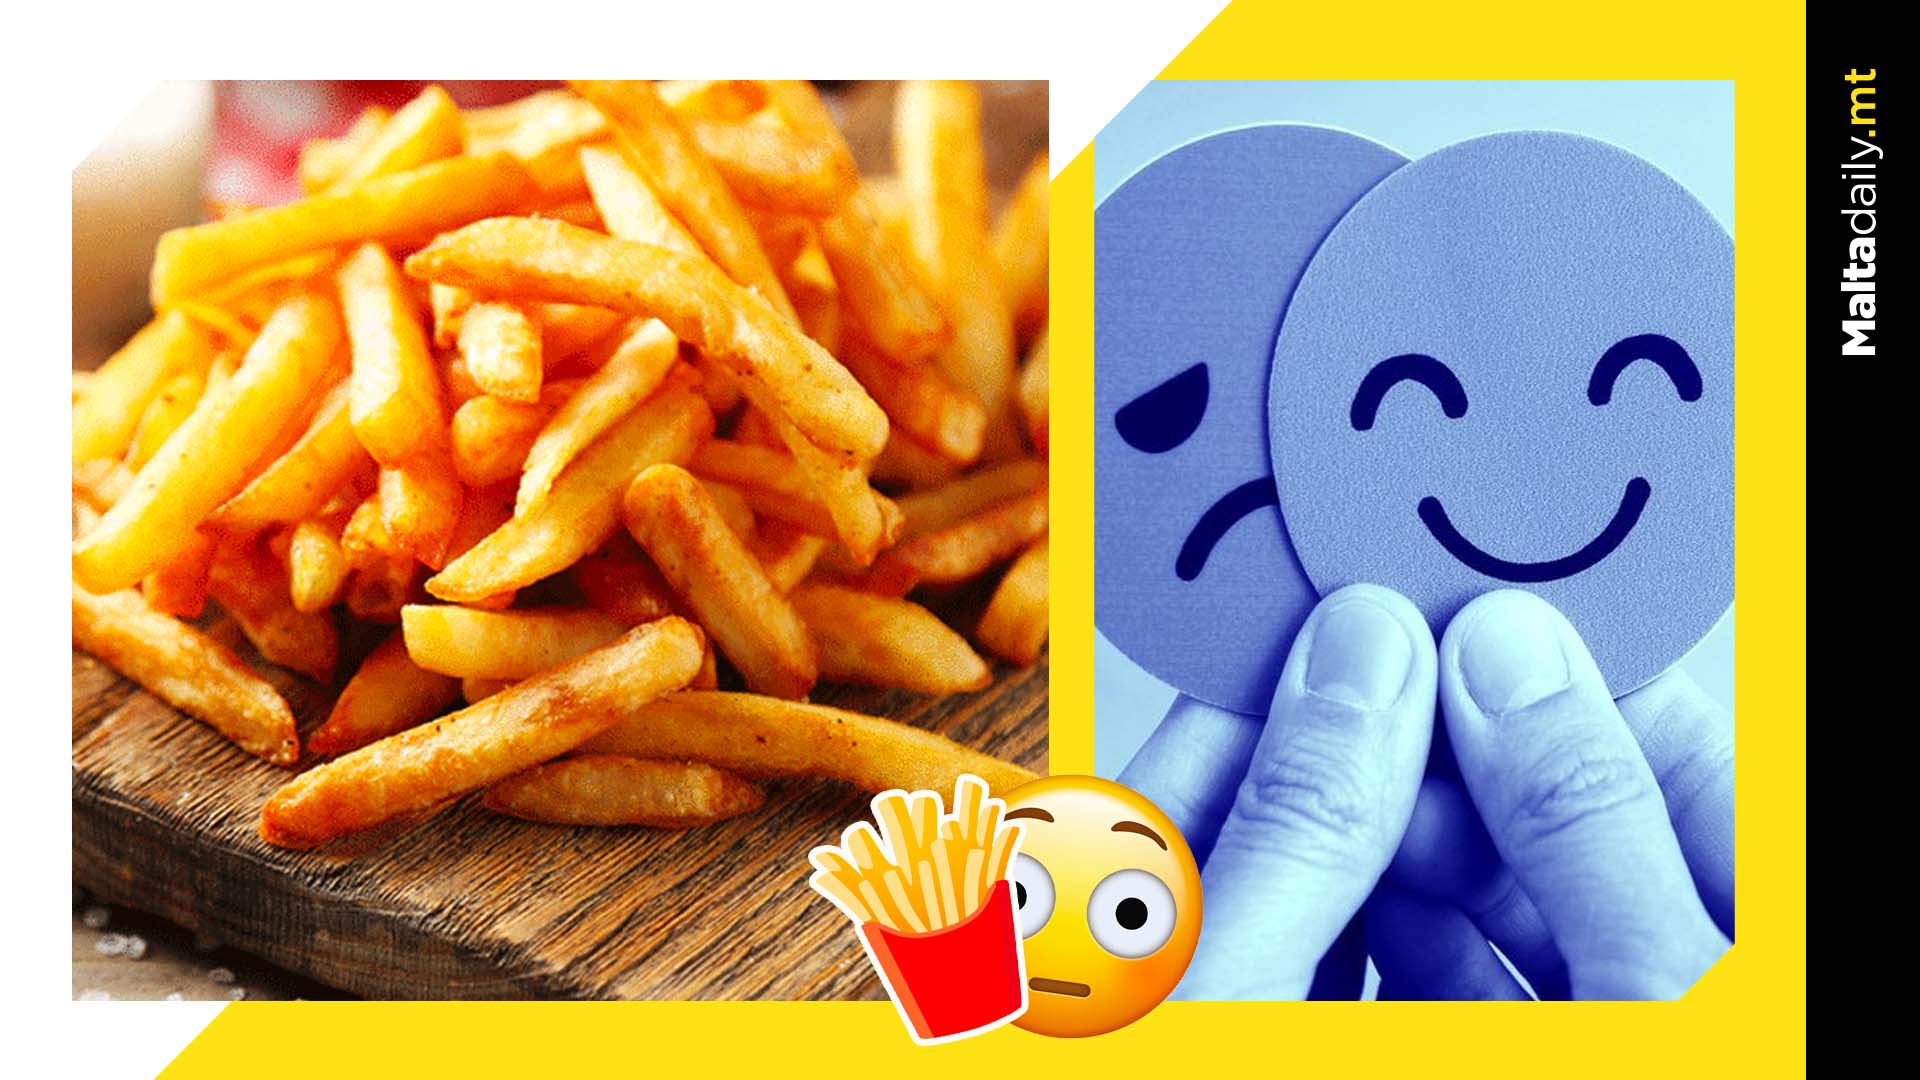 French fries may have links to anxiety & depression, study suggests